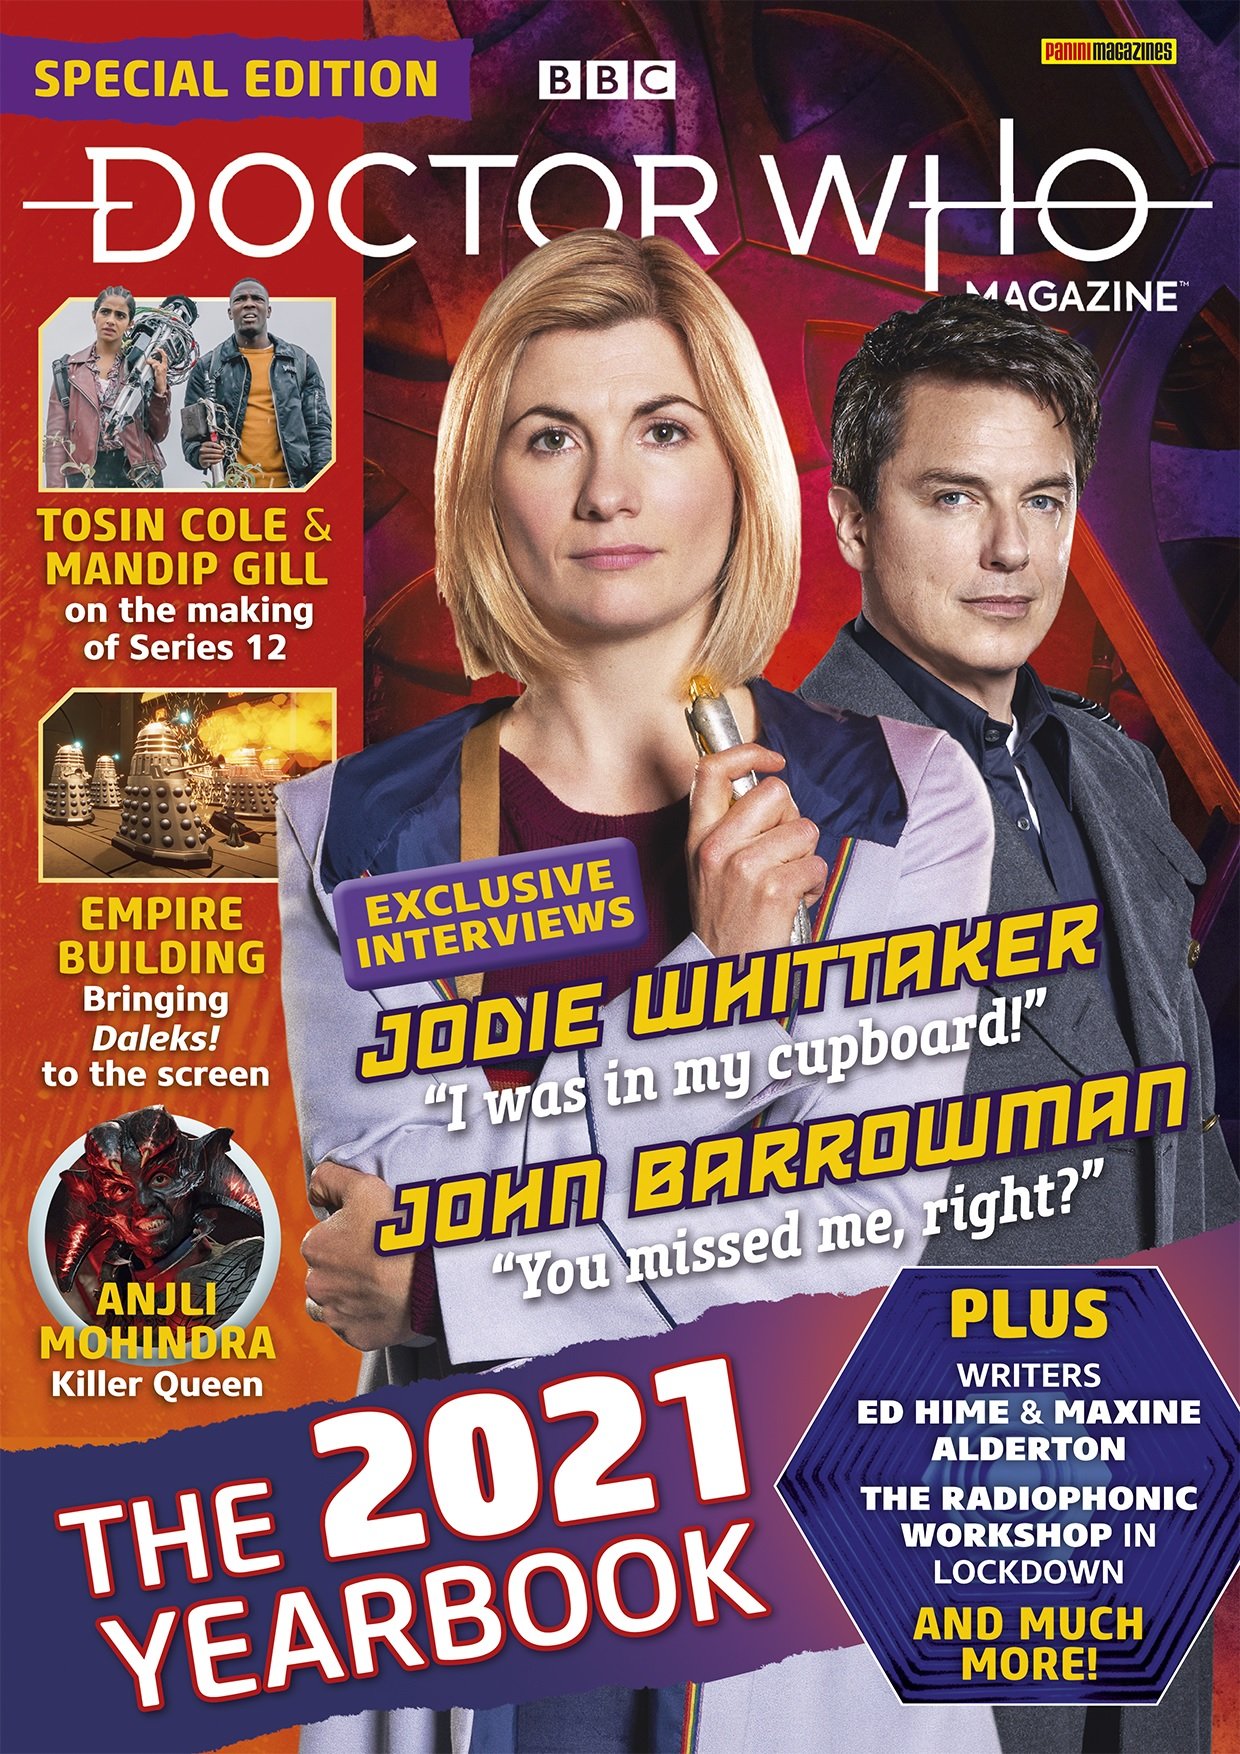 Out Now: Doctor Who Magazine Special Edition – The 2021 Yearbook